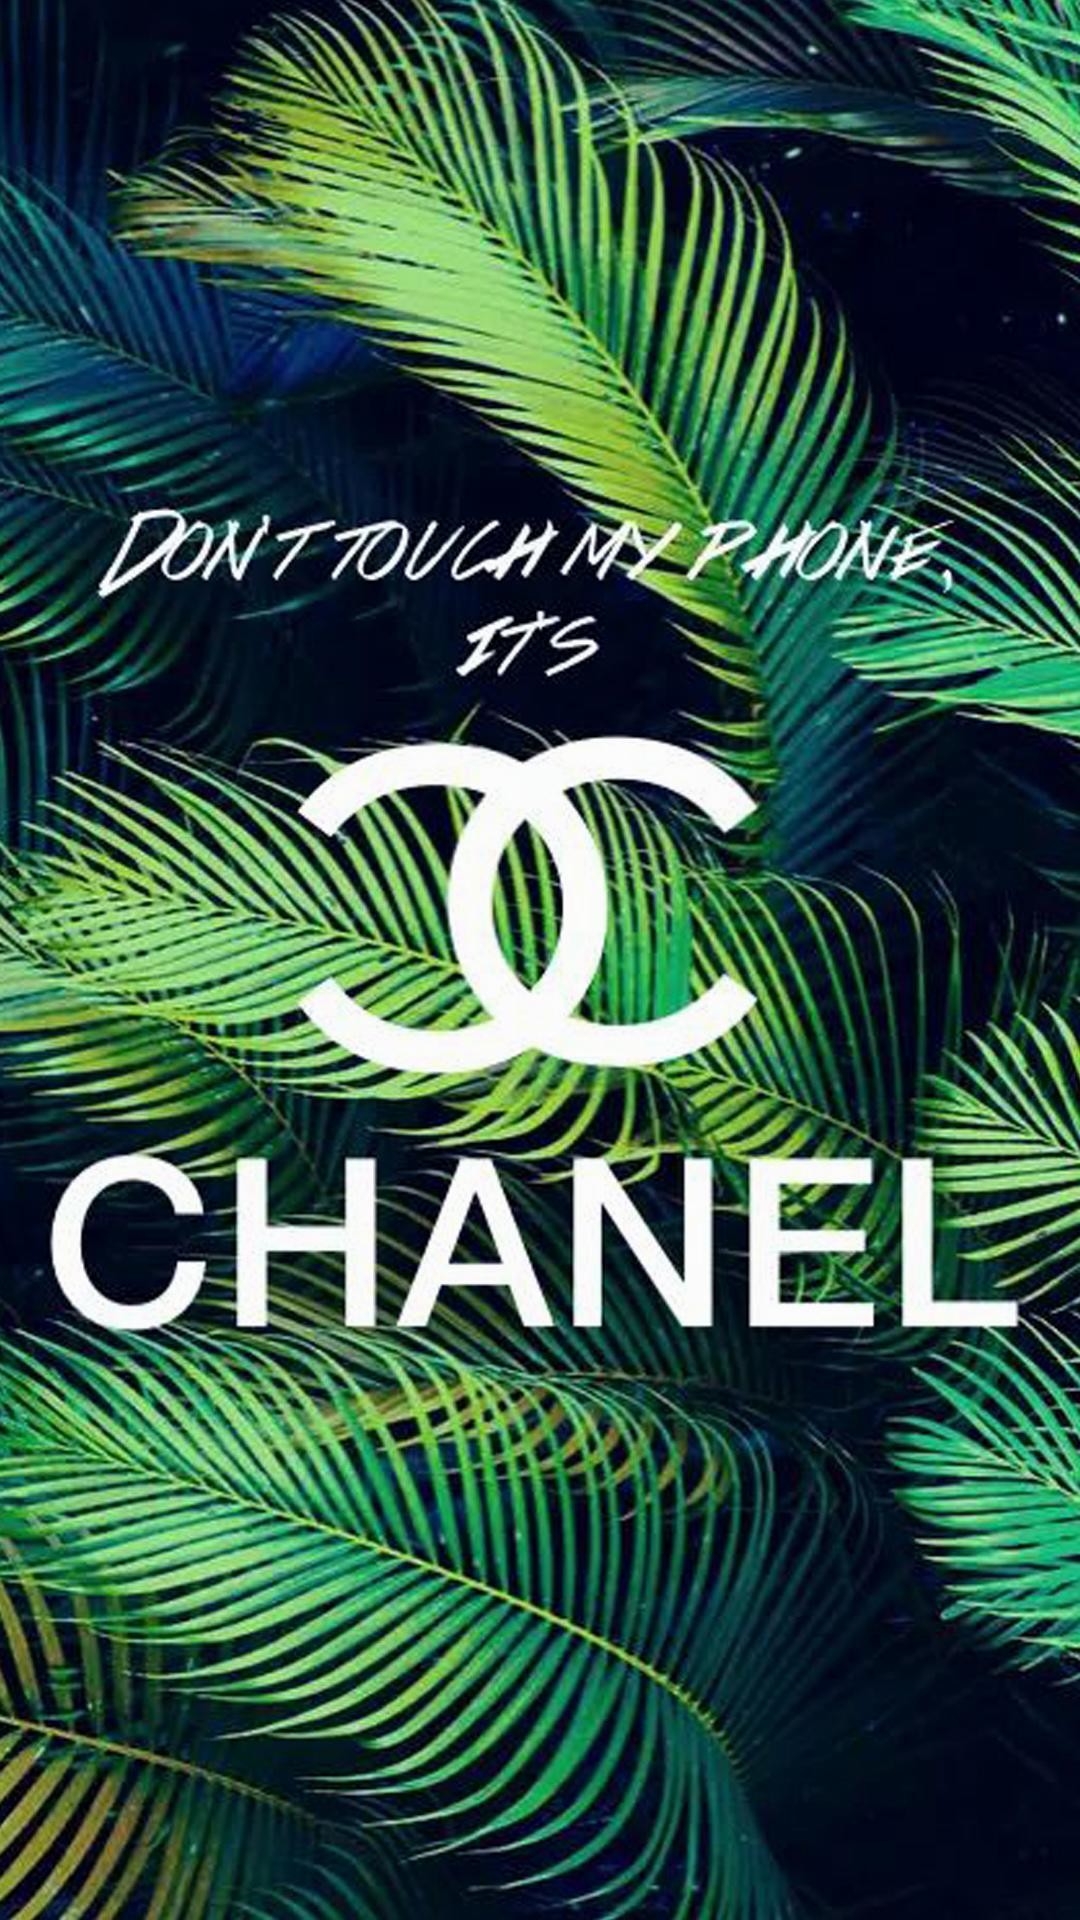 Wiki Chanel Iphone Backgrounds Free Download Pic 
 - Chanel Wallpaper Iphone - HD Wallpaper 